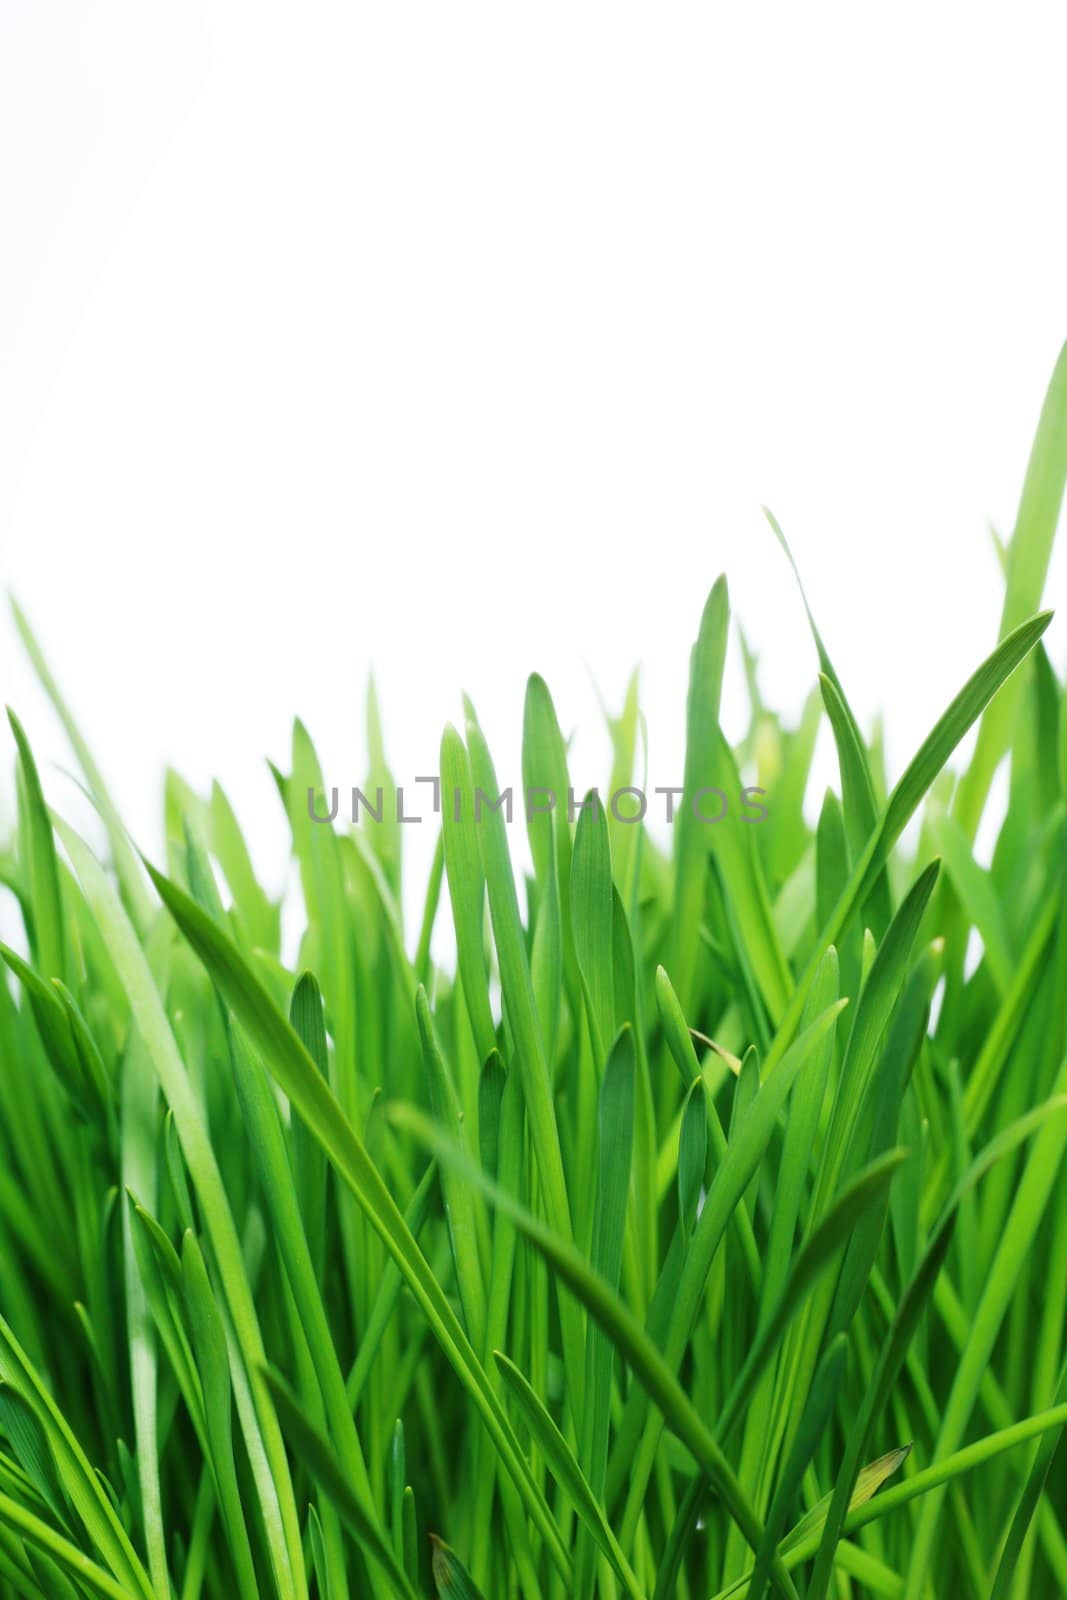 close-up of green grass against white